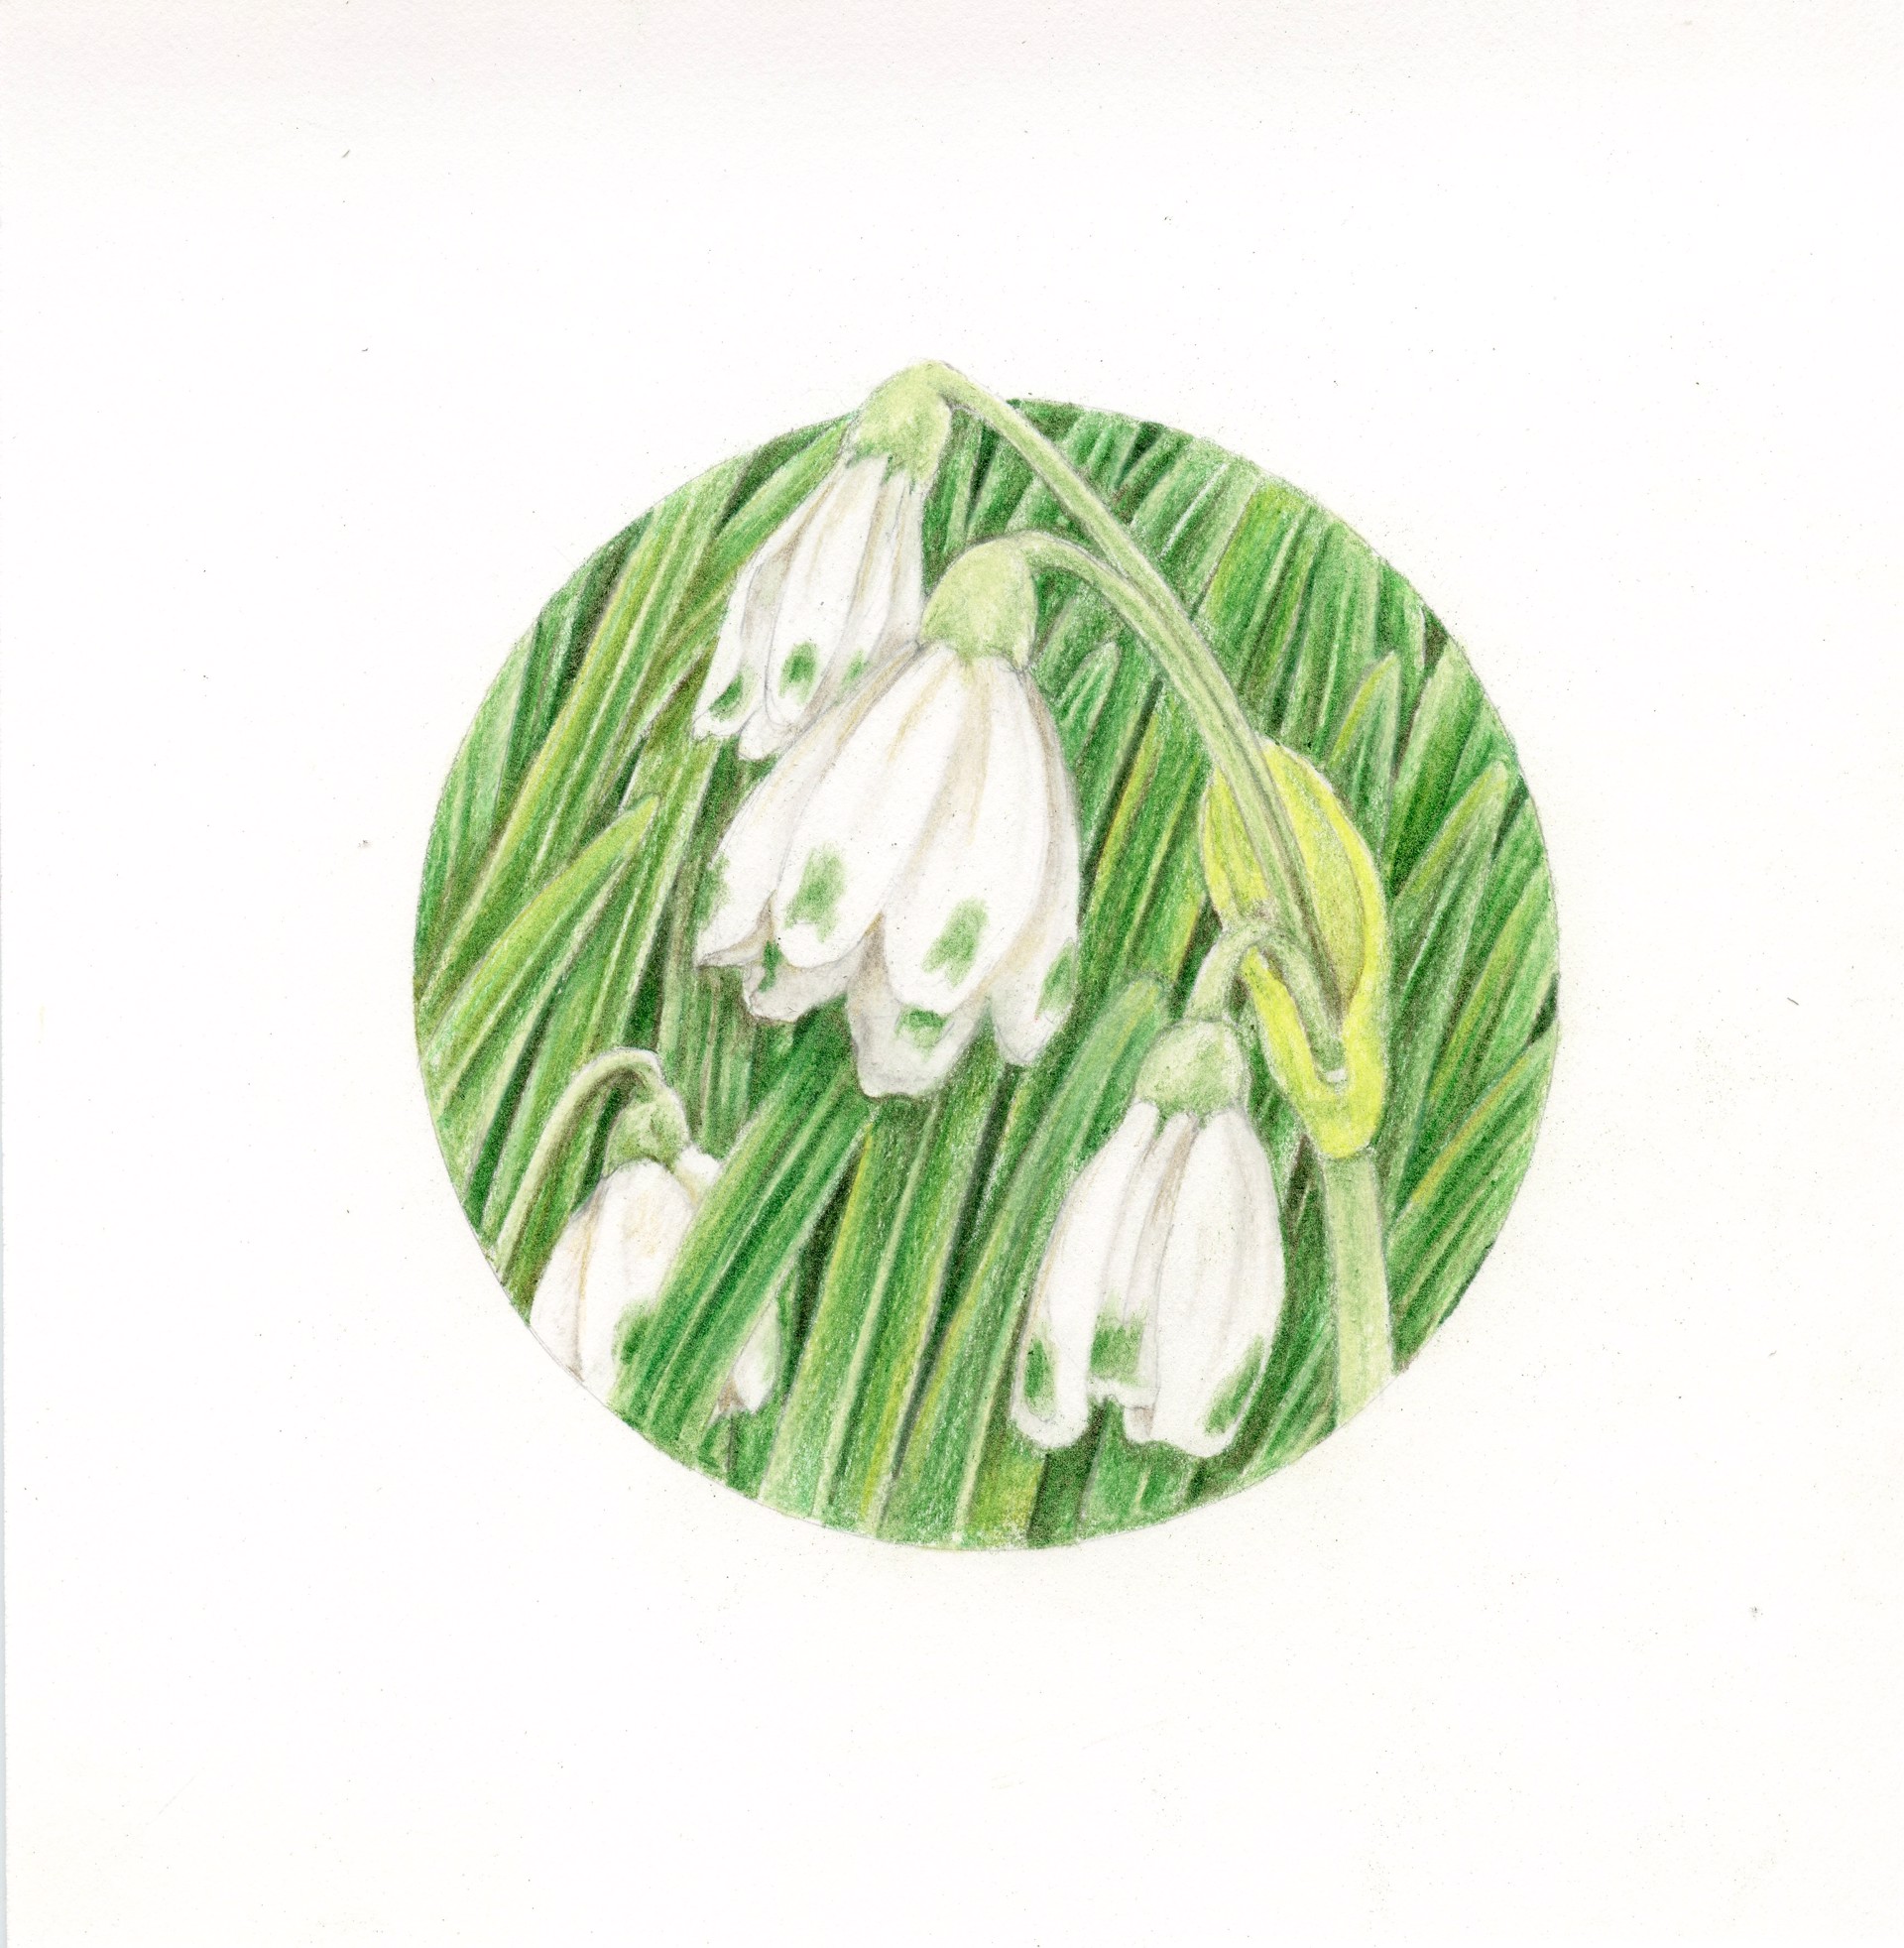 Snowdrops by Mary Lee Eggart